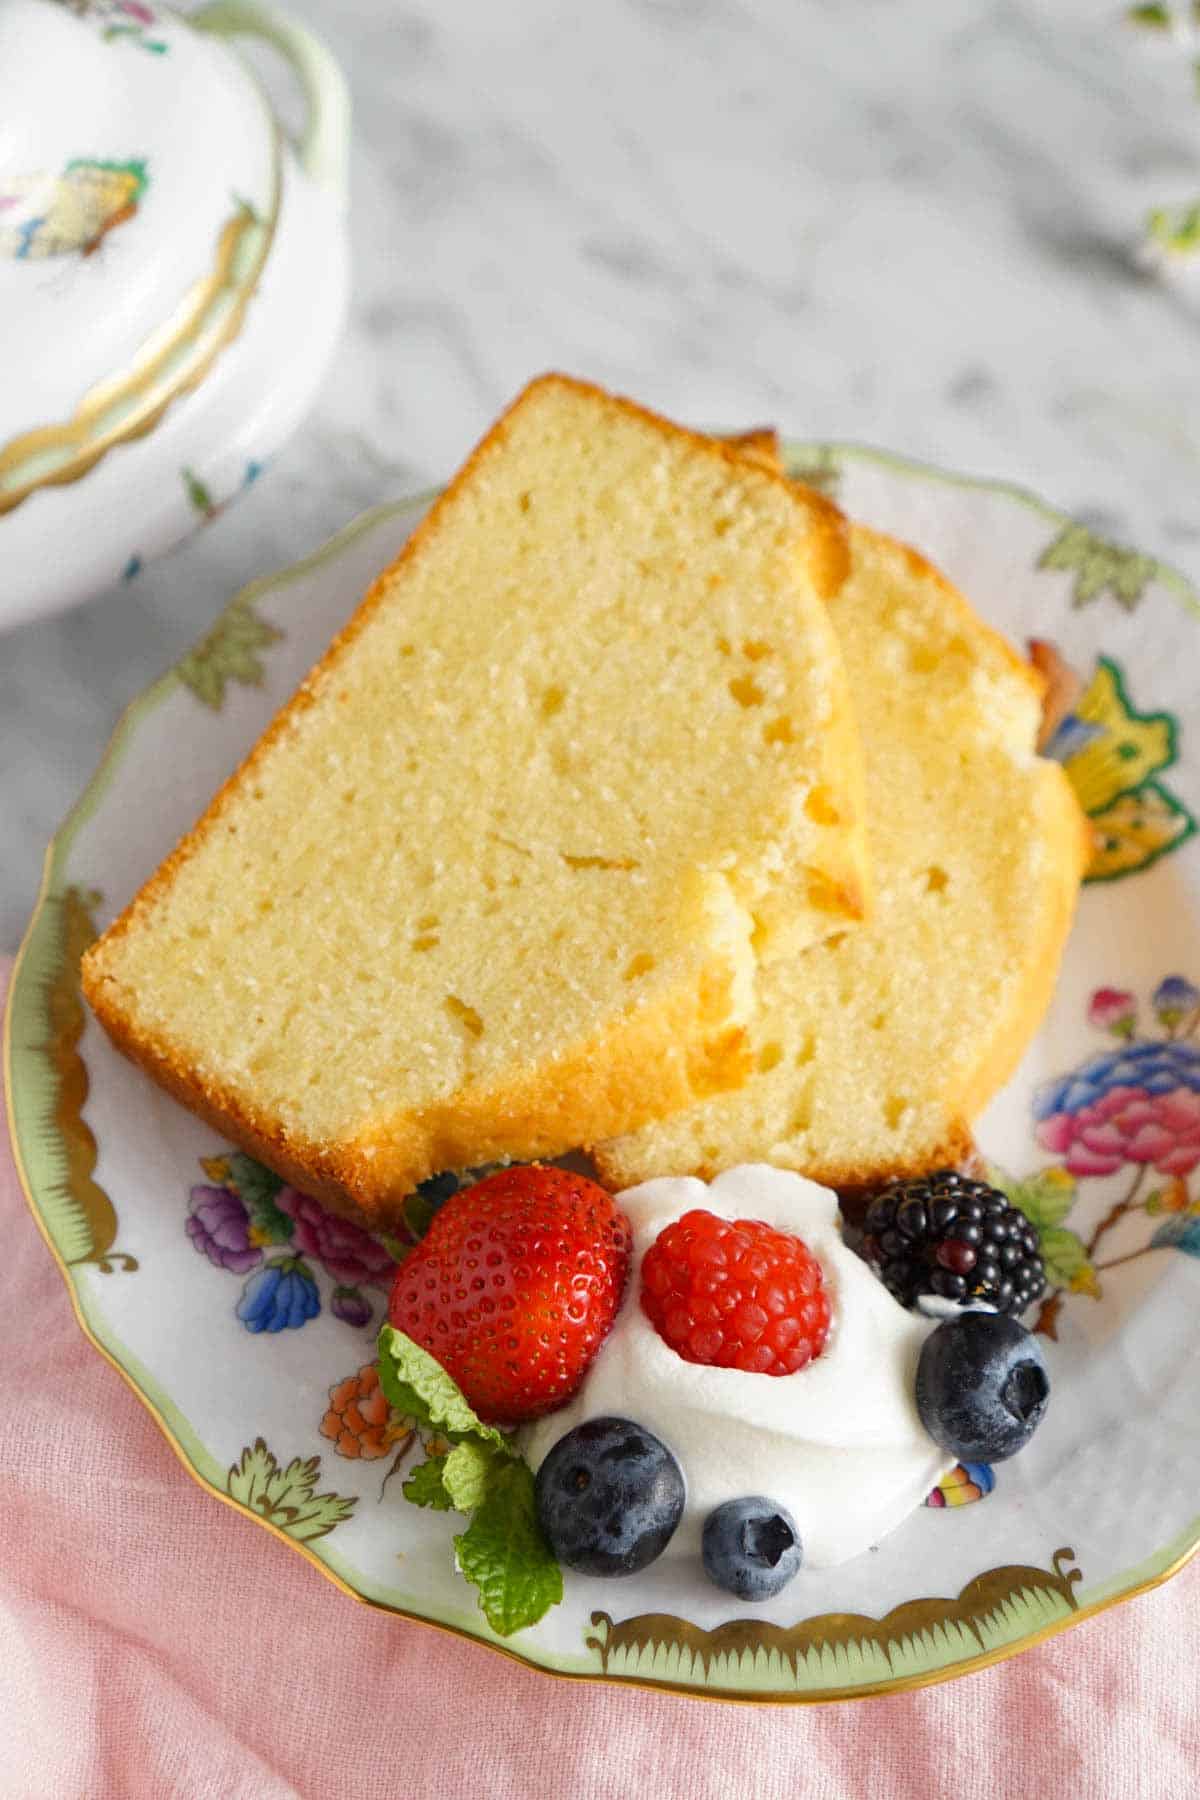 A plate with two slices of pound cake along with some whipped cream with berries on the side.